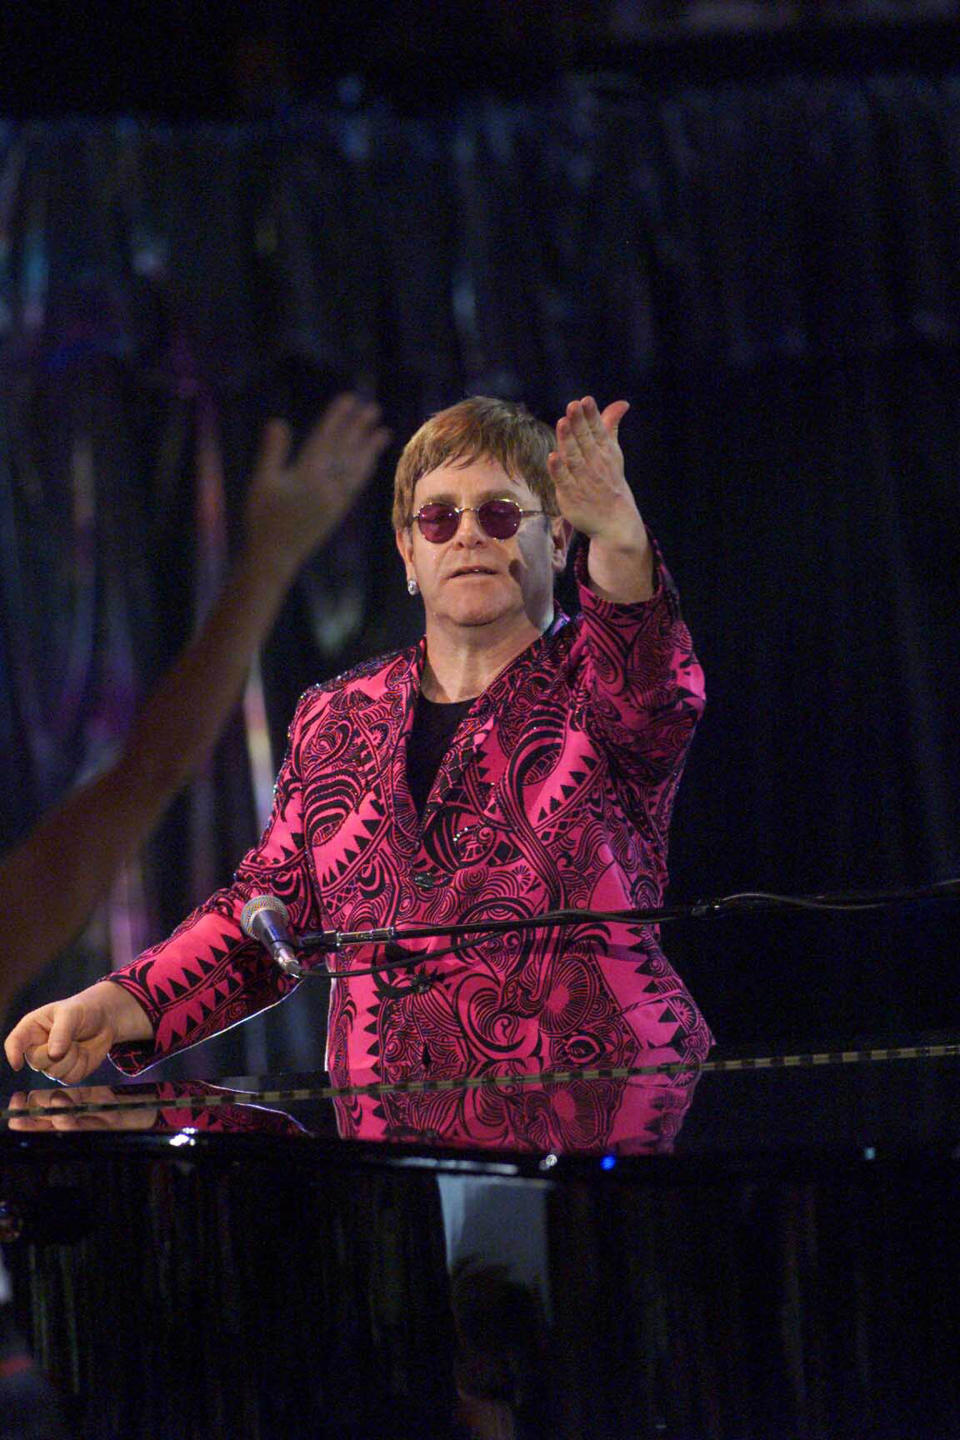 Elton John in hot-pink paisley at a concert at Madison Square Garden on Oct. 22 in New York.